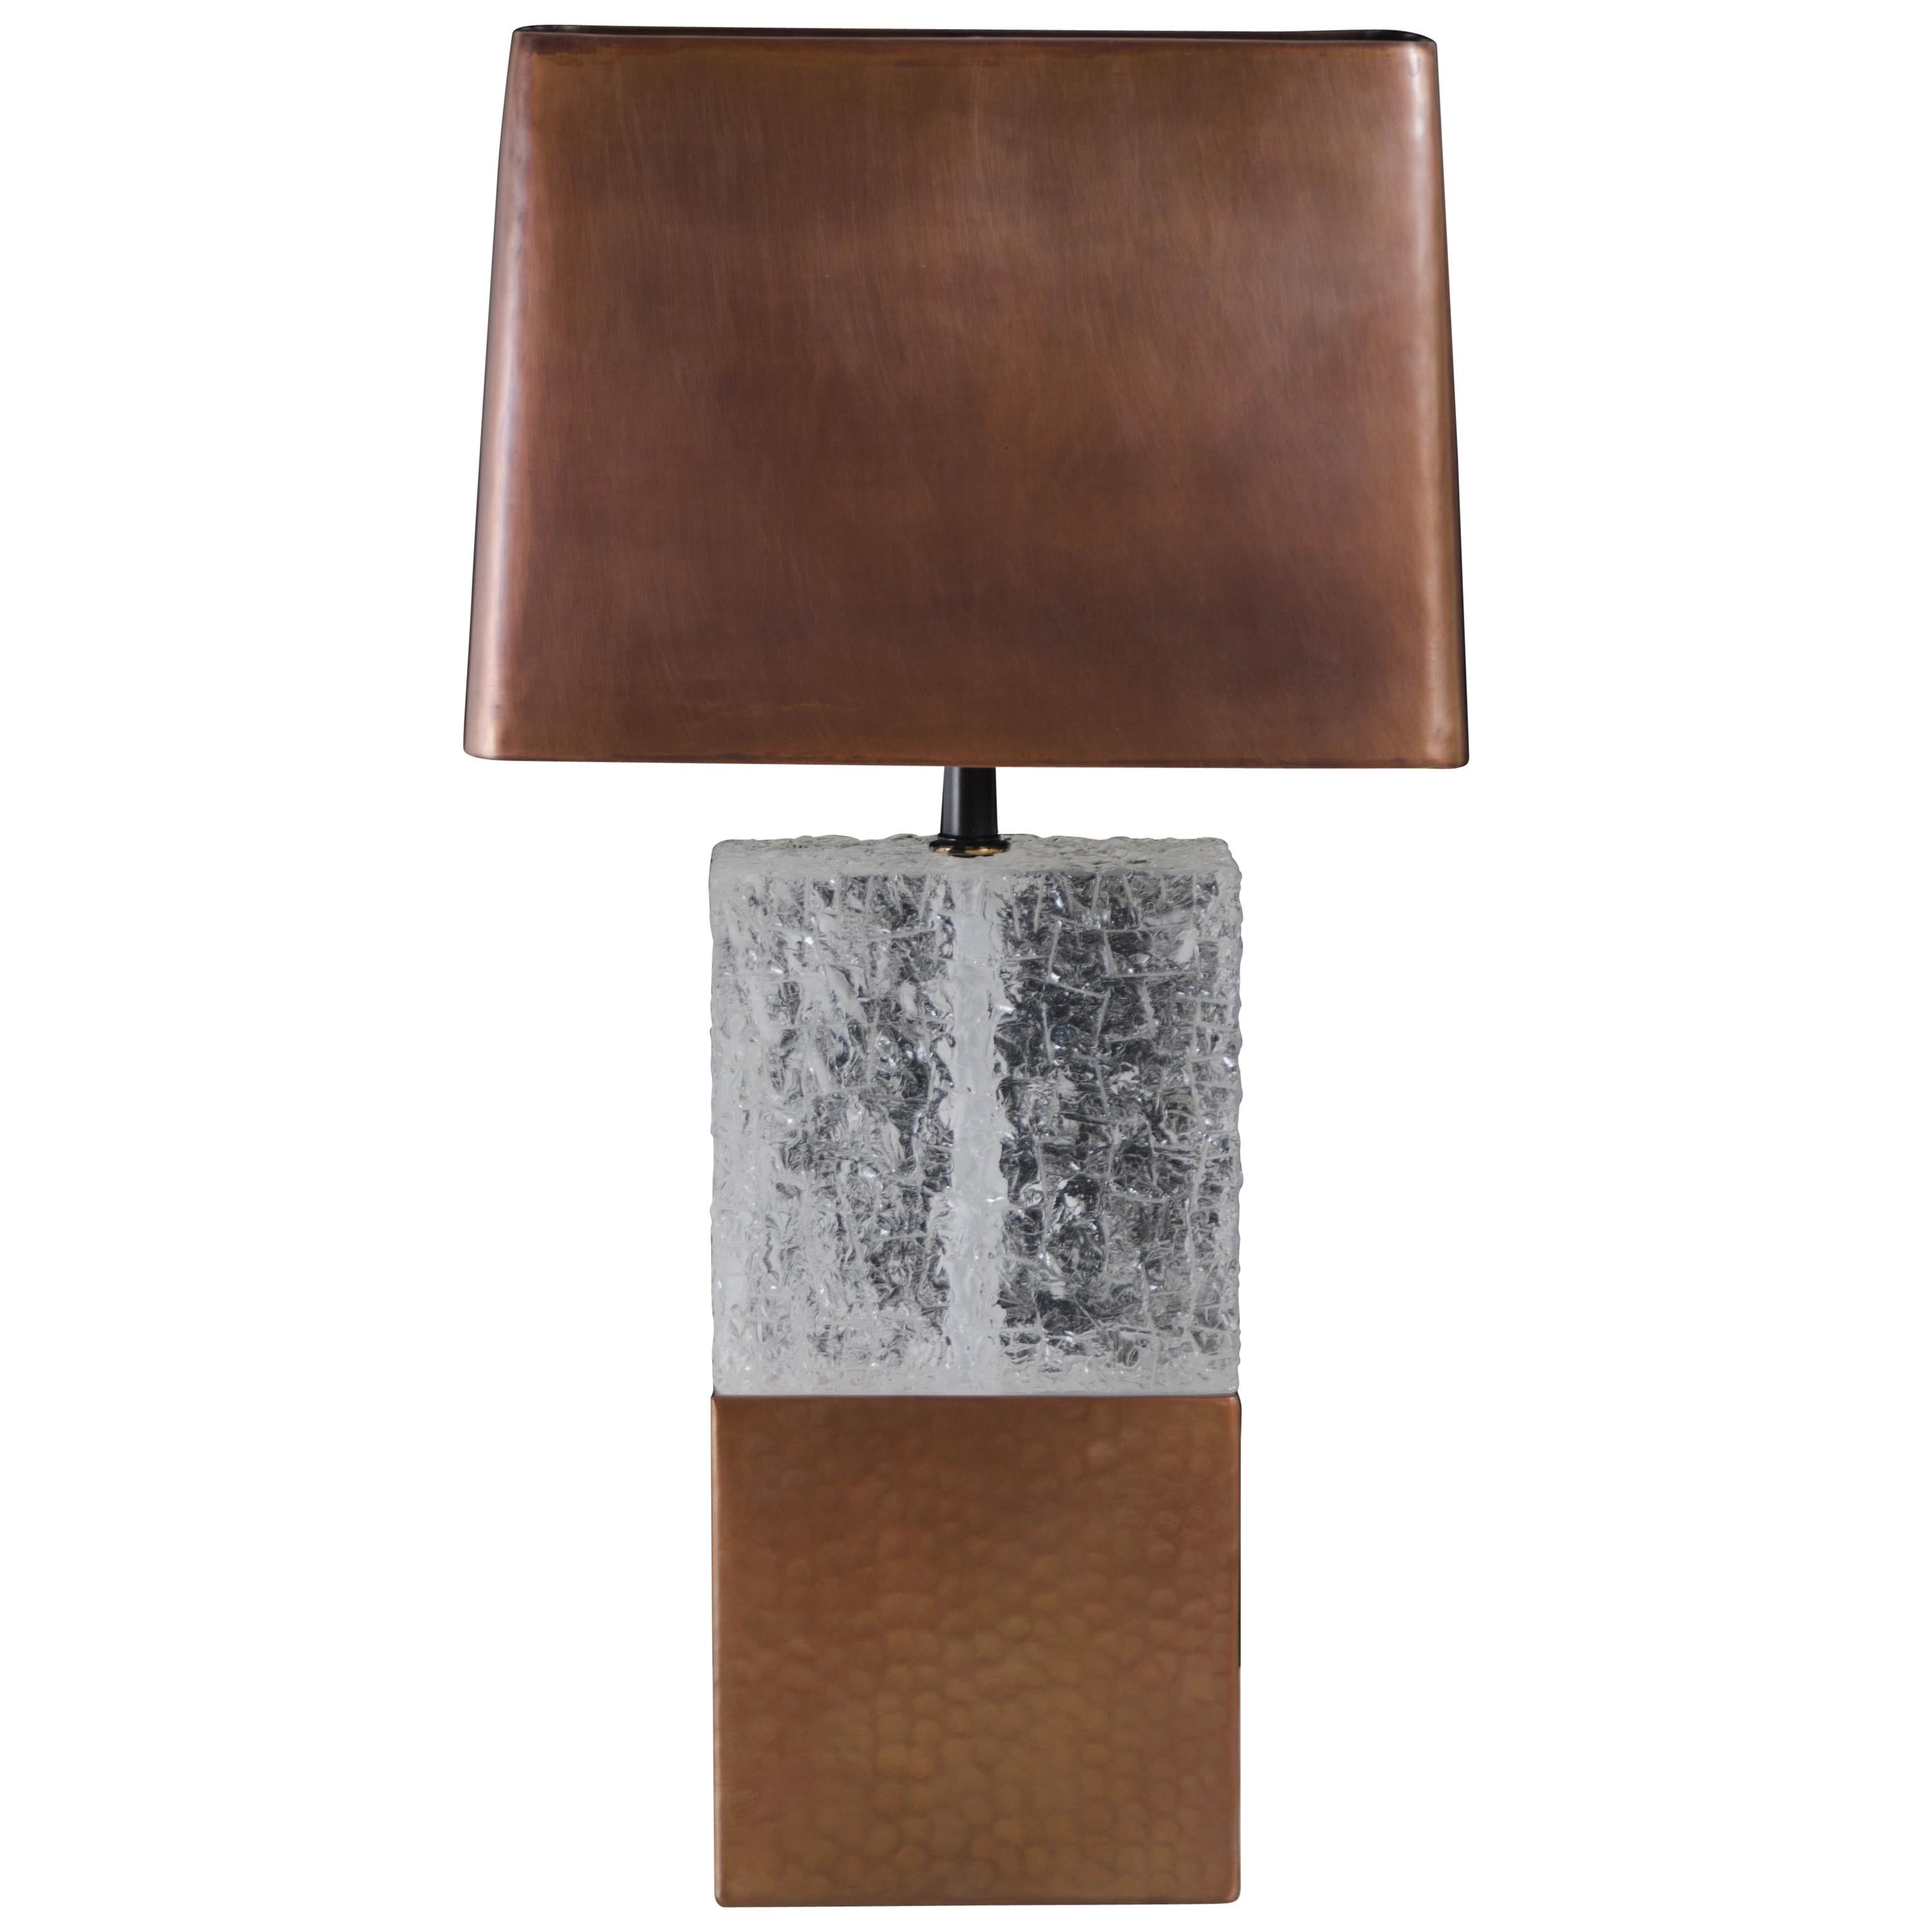 Double C Table Lamp with Copper Shade, Crystal and Copper by Robert Kuo Handmade